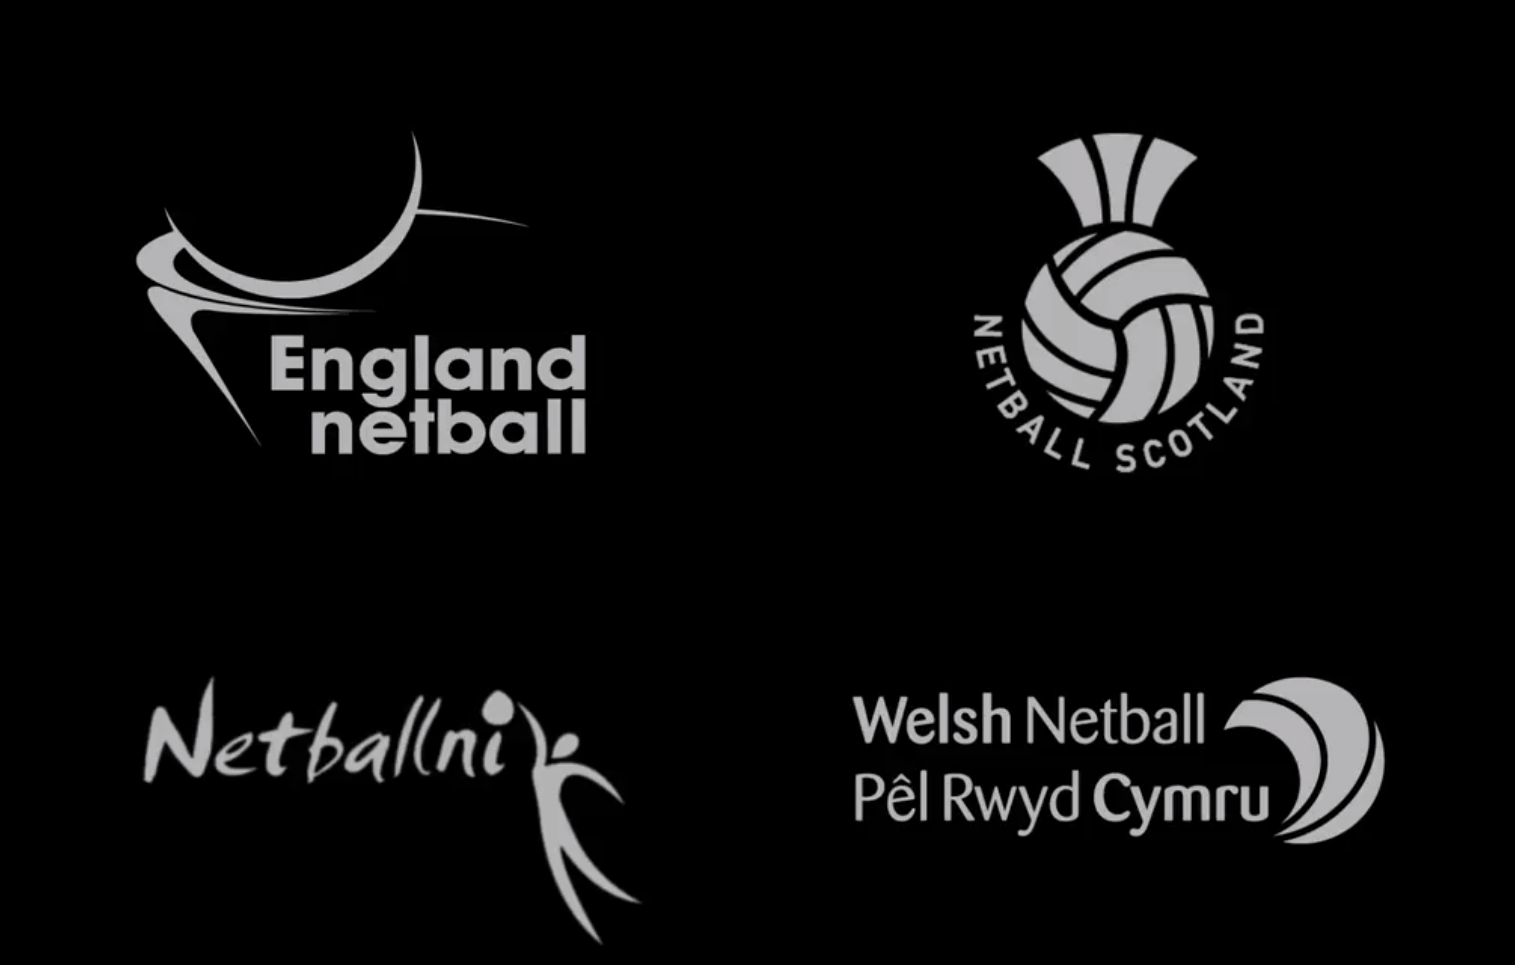 The four Home Nations have partnered to encourage people to renew memberships ©England Netball